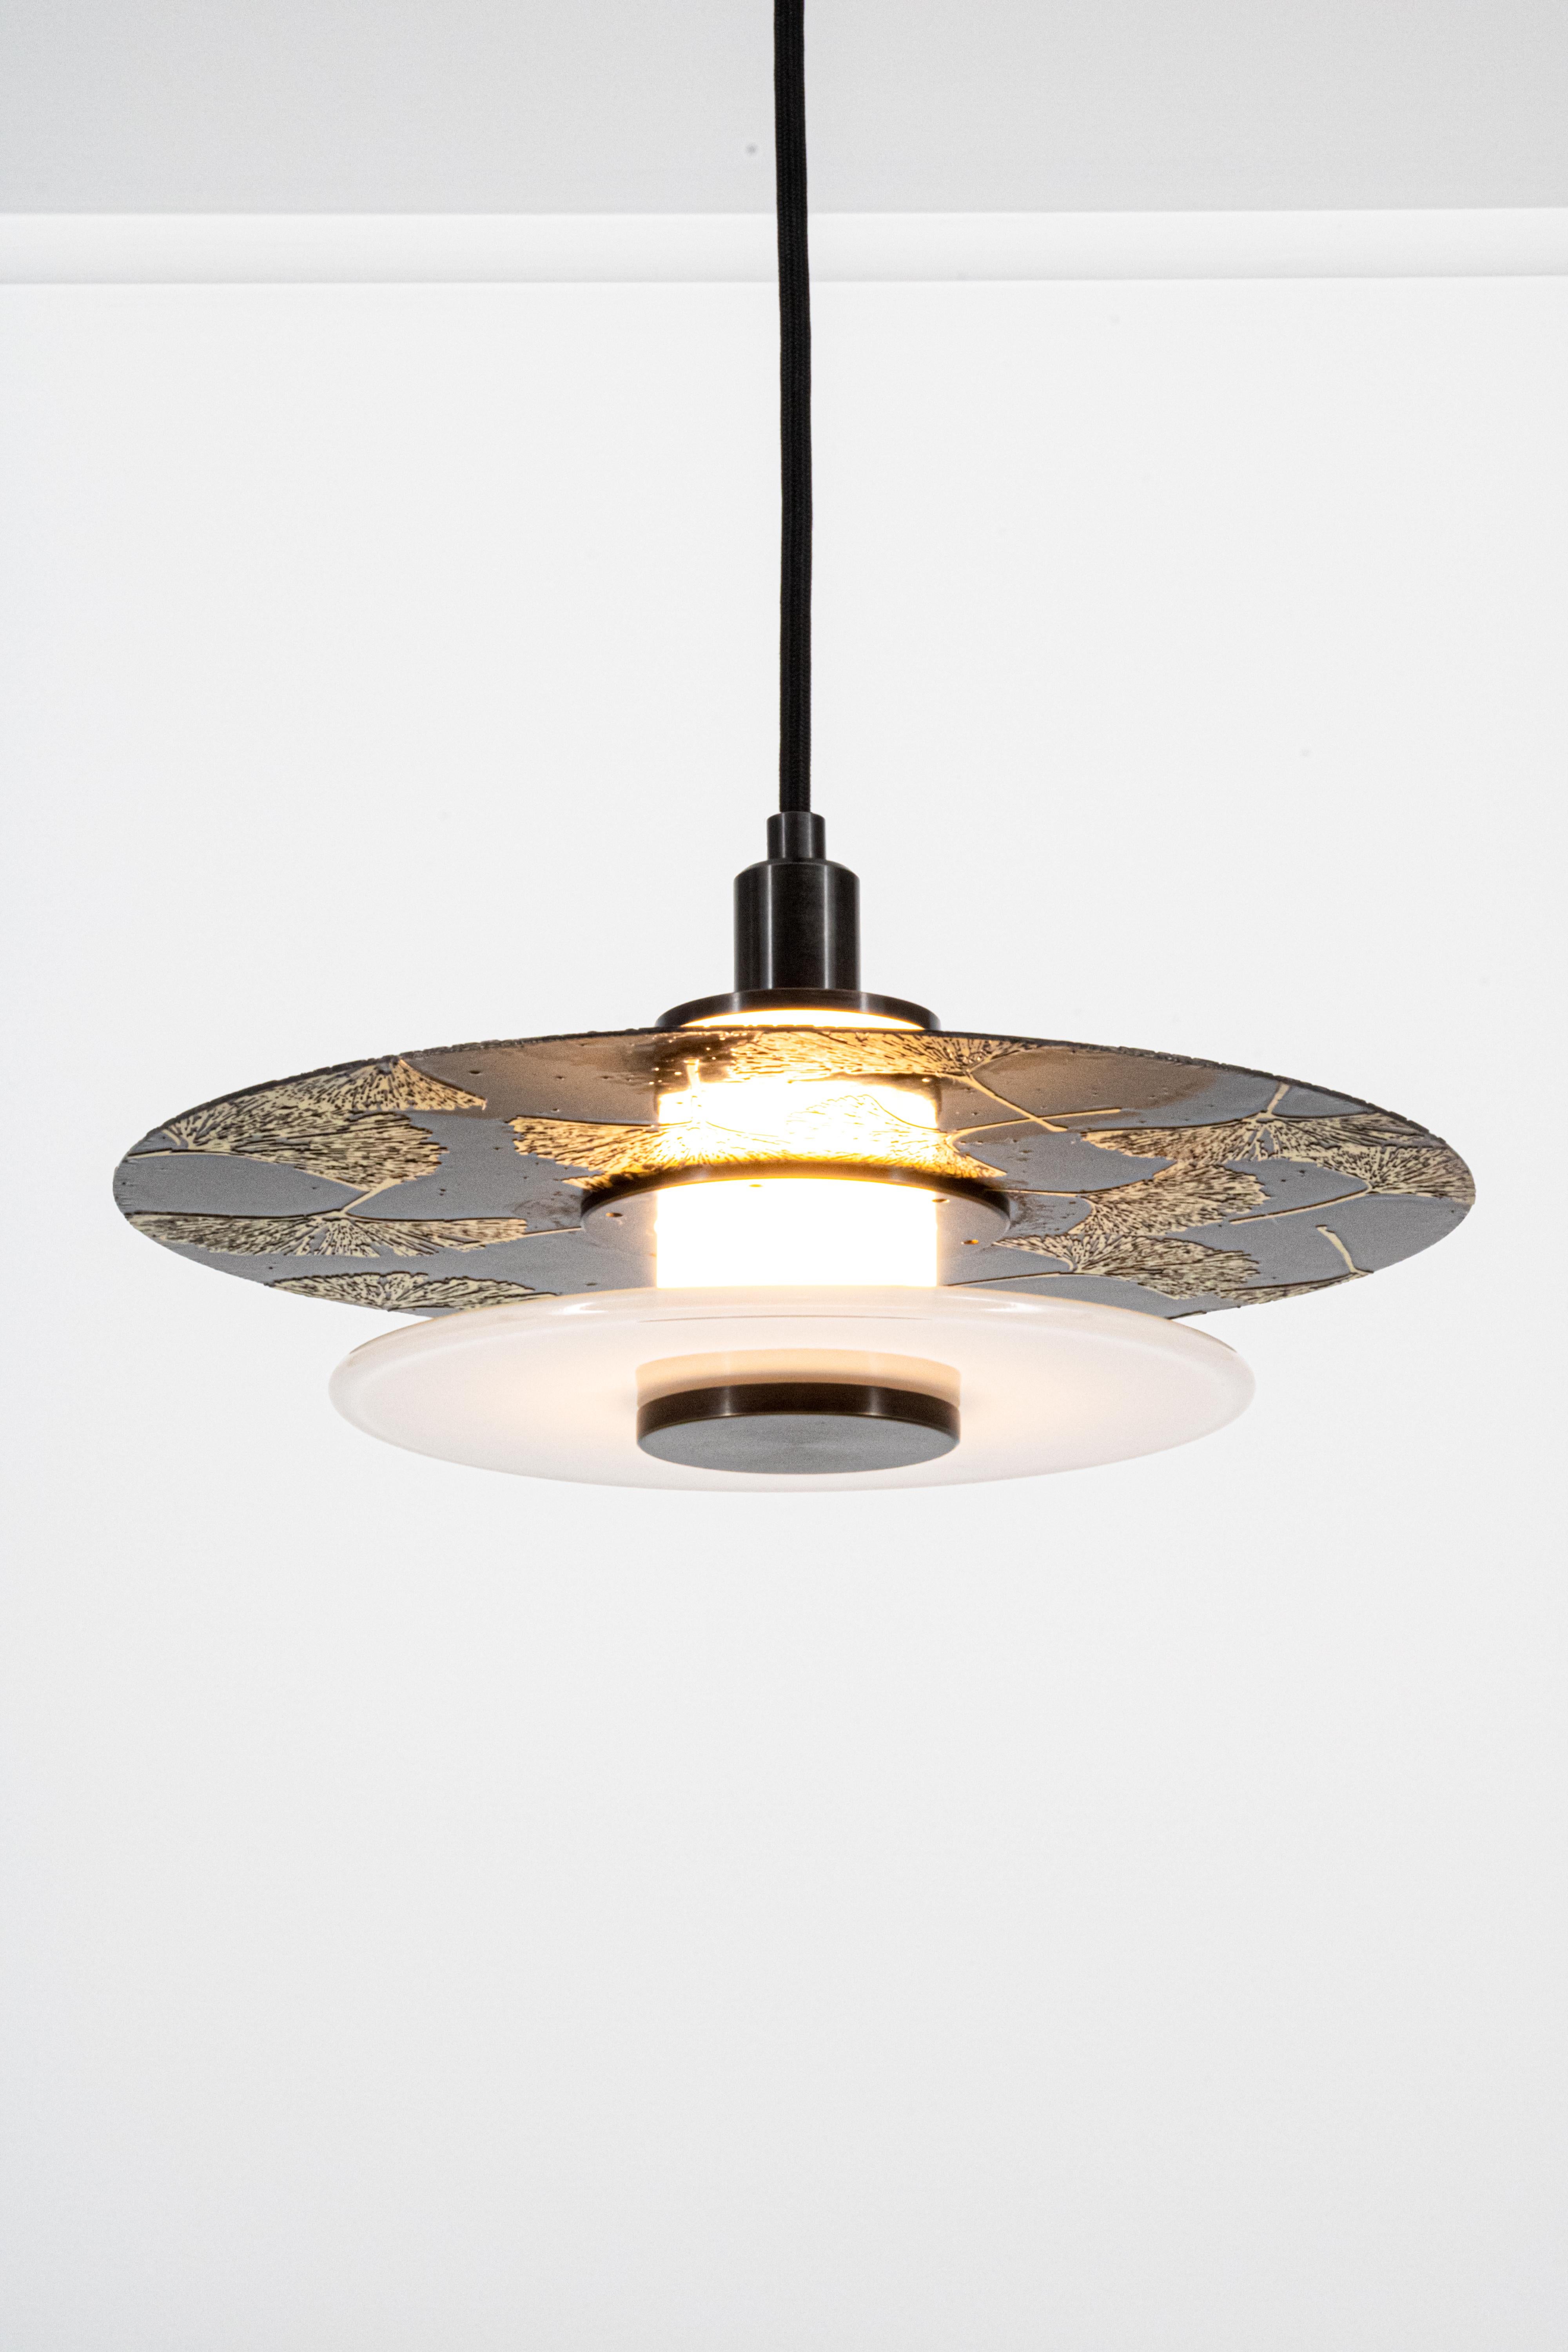 Klein Pendant w/ Milk Glass, Etched Ginkgo Relief in Blackened Brass For Sale 5